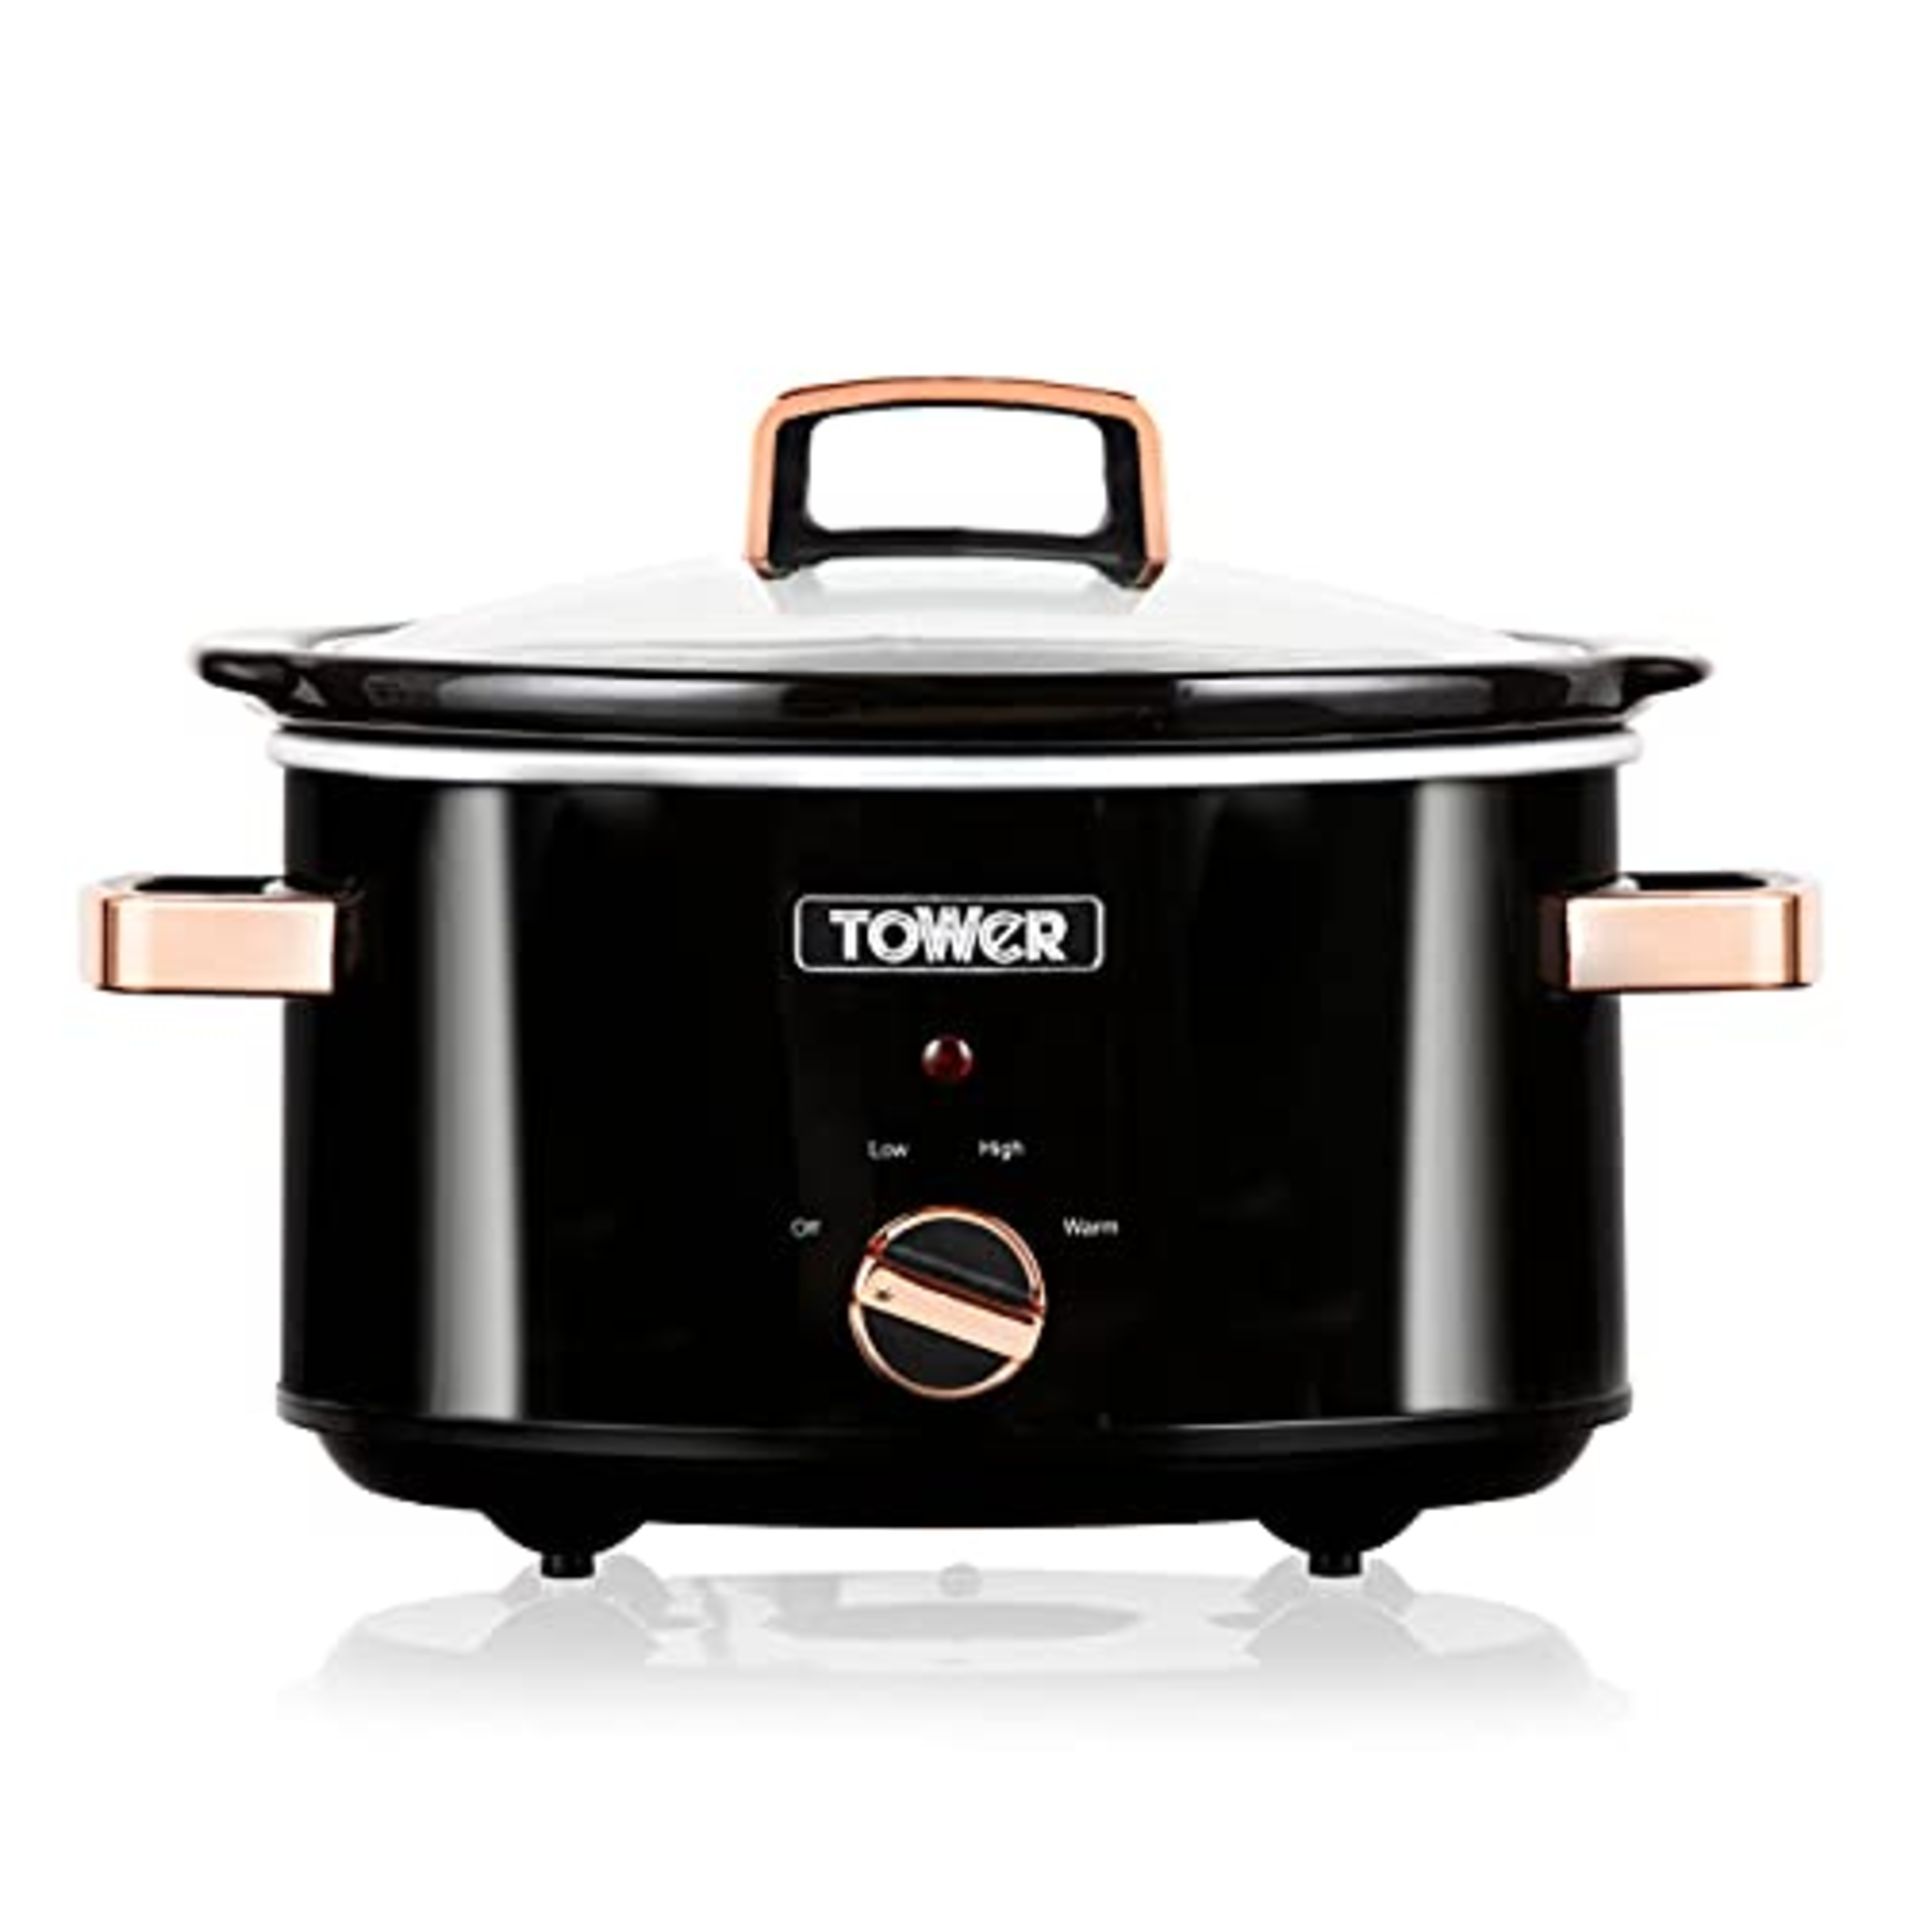 Tower T16018RG 3.5 Litre Stainless Steel Slow Cooker with 3 Heat Settings and Keep War